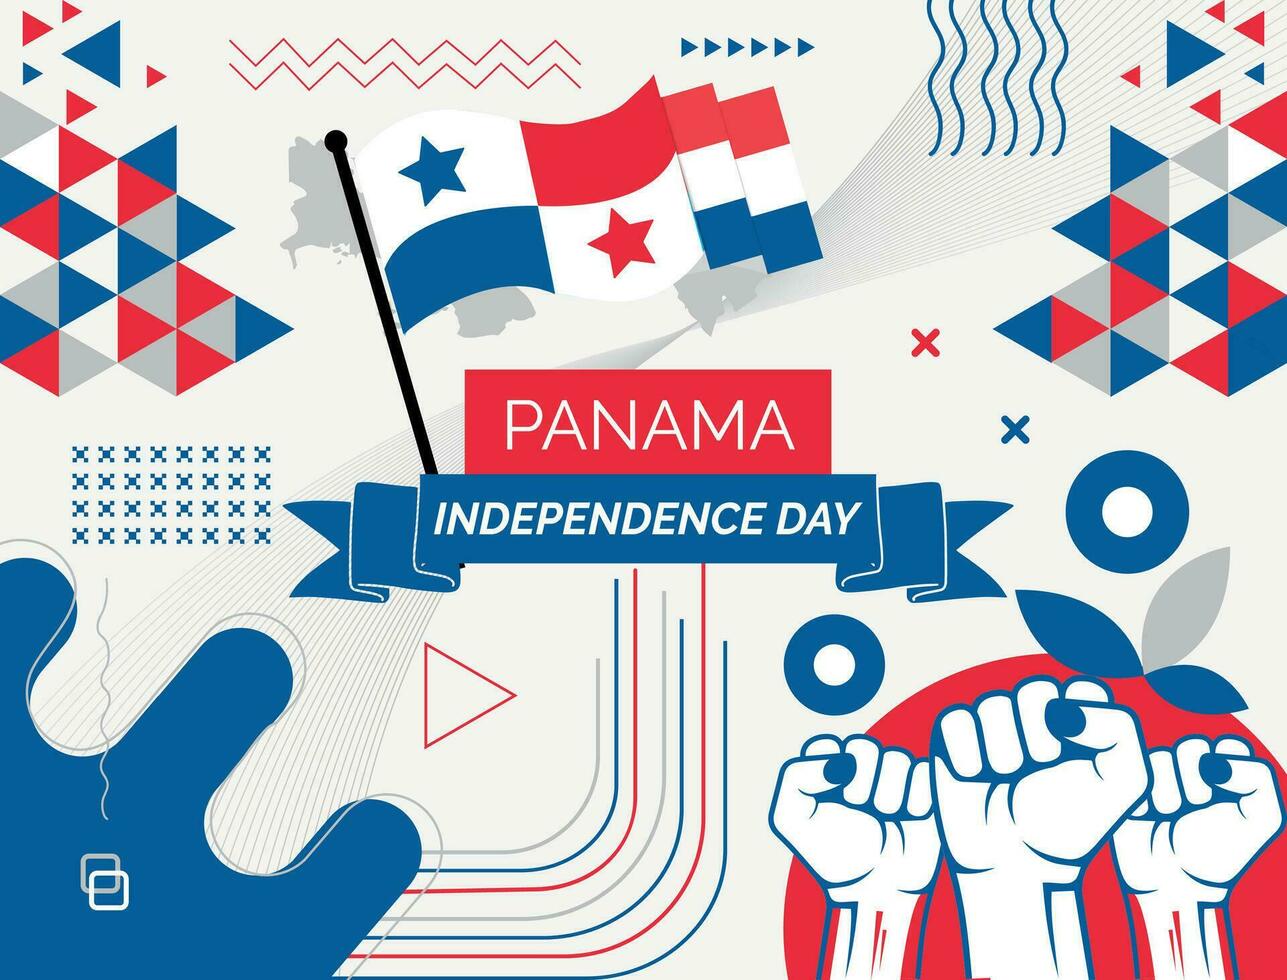 PANAMA Map and raised fists. National day or Independence day design for PANAMA celebration. Modern retro design with abstract icons. Vector illustration.